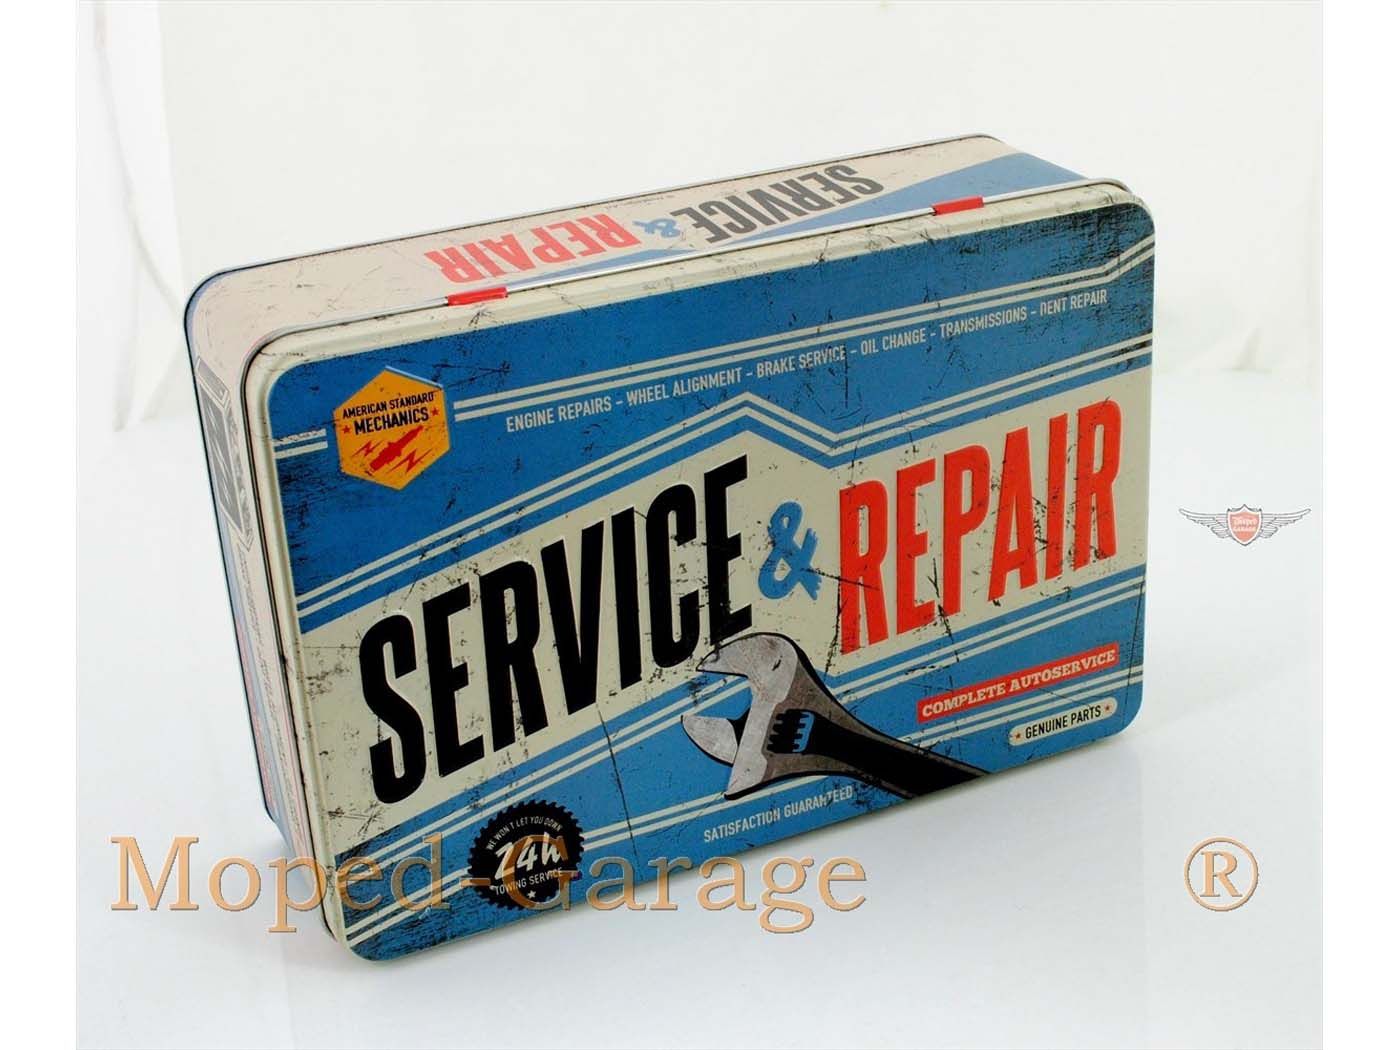 Servic & Repair Tin Box Workshop Storage Box For Moped Scooter Motorcycle